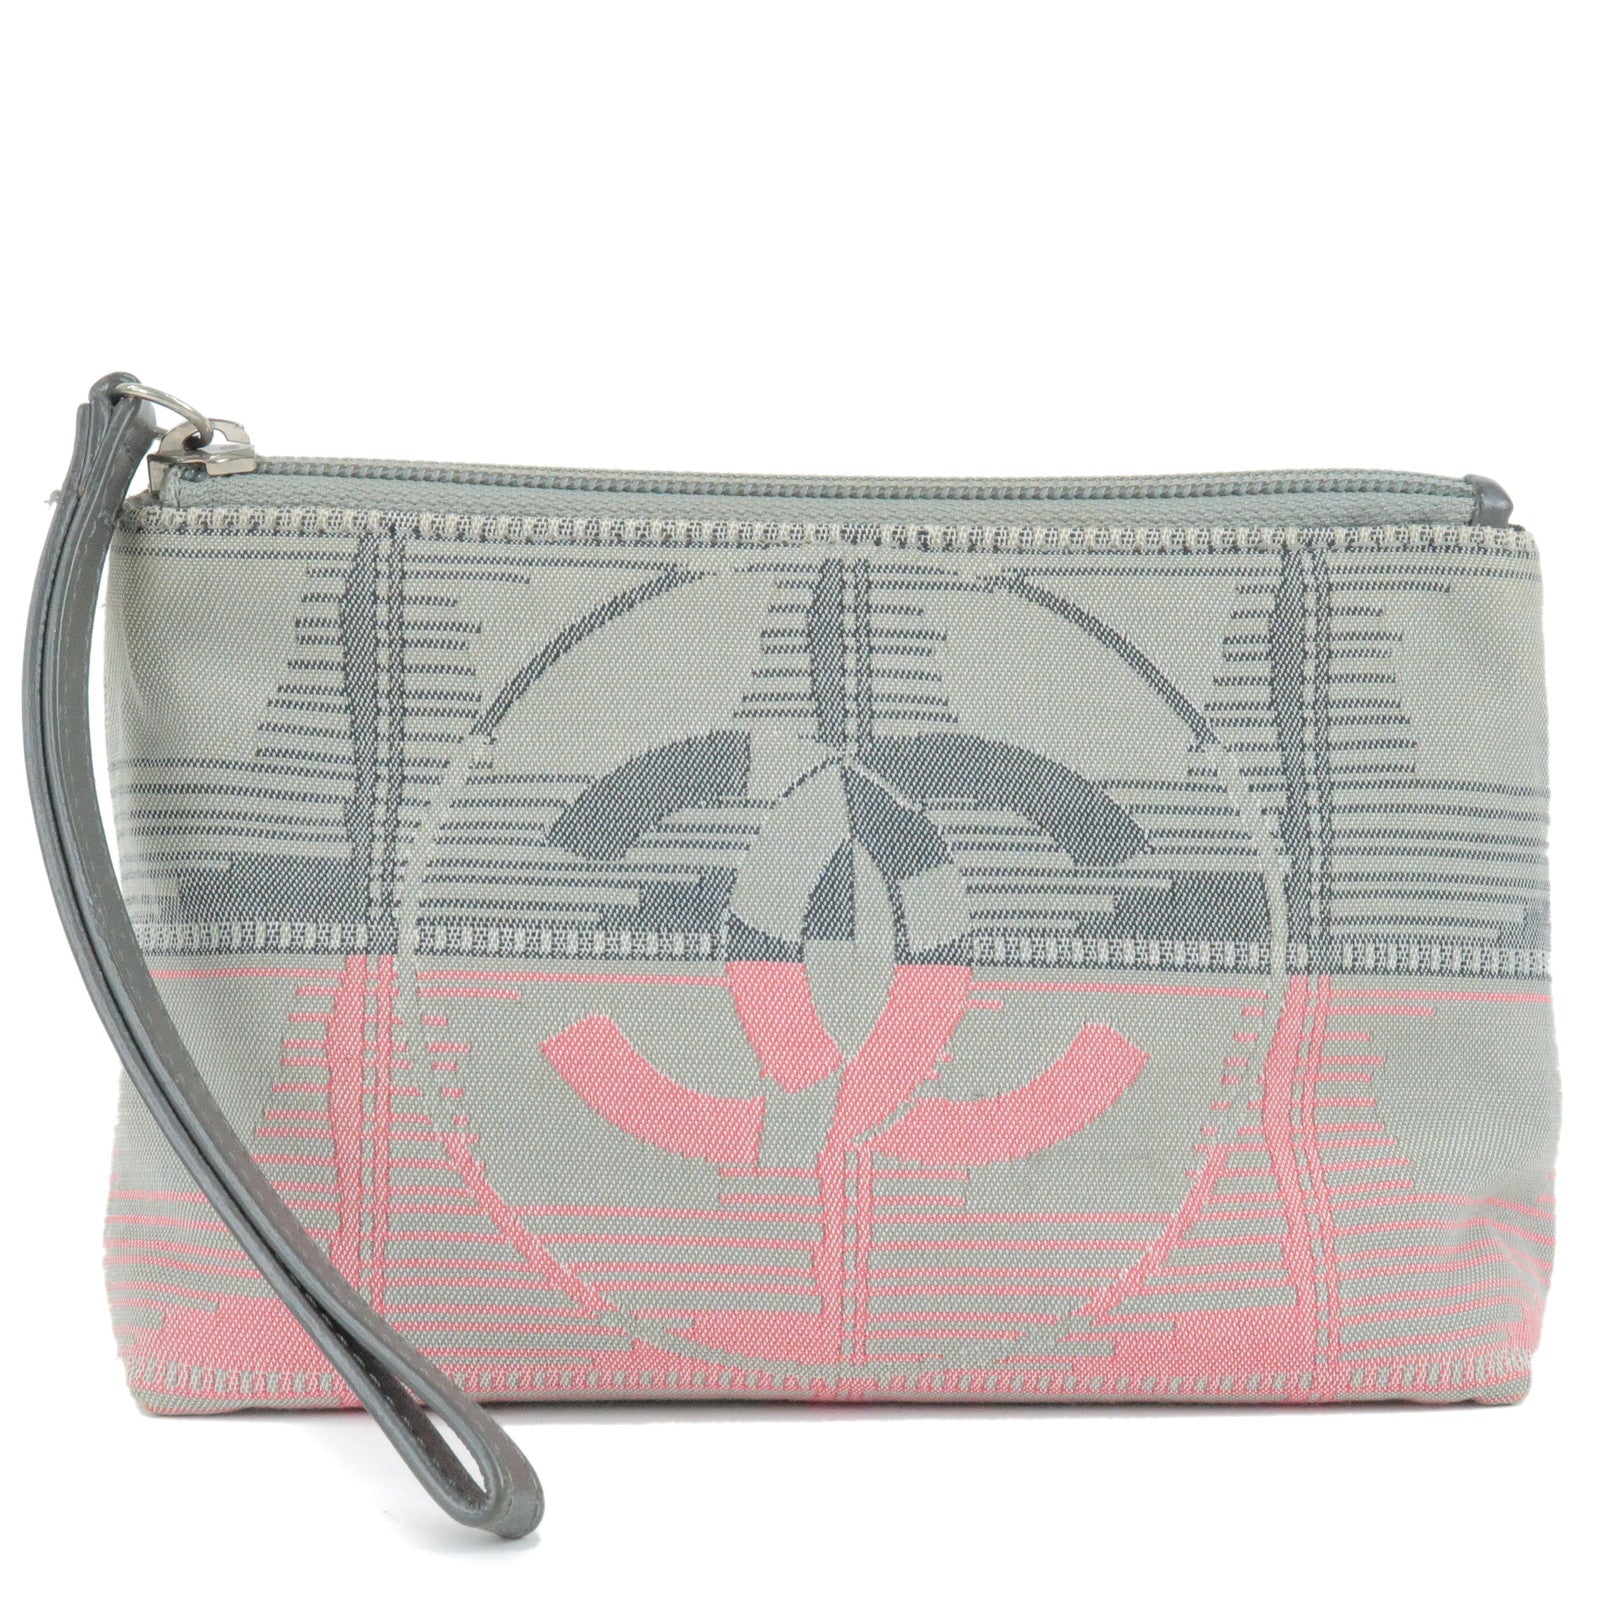 CHANEL-Travel-Line-Pouch-Clutch-Bag-Gray-Pink